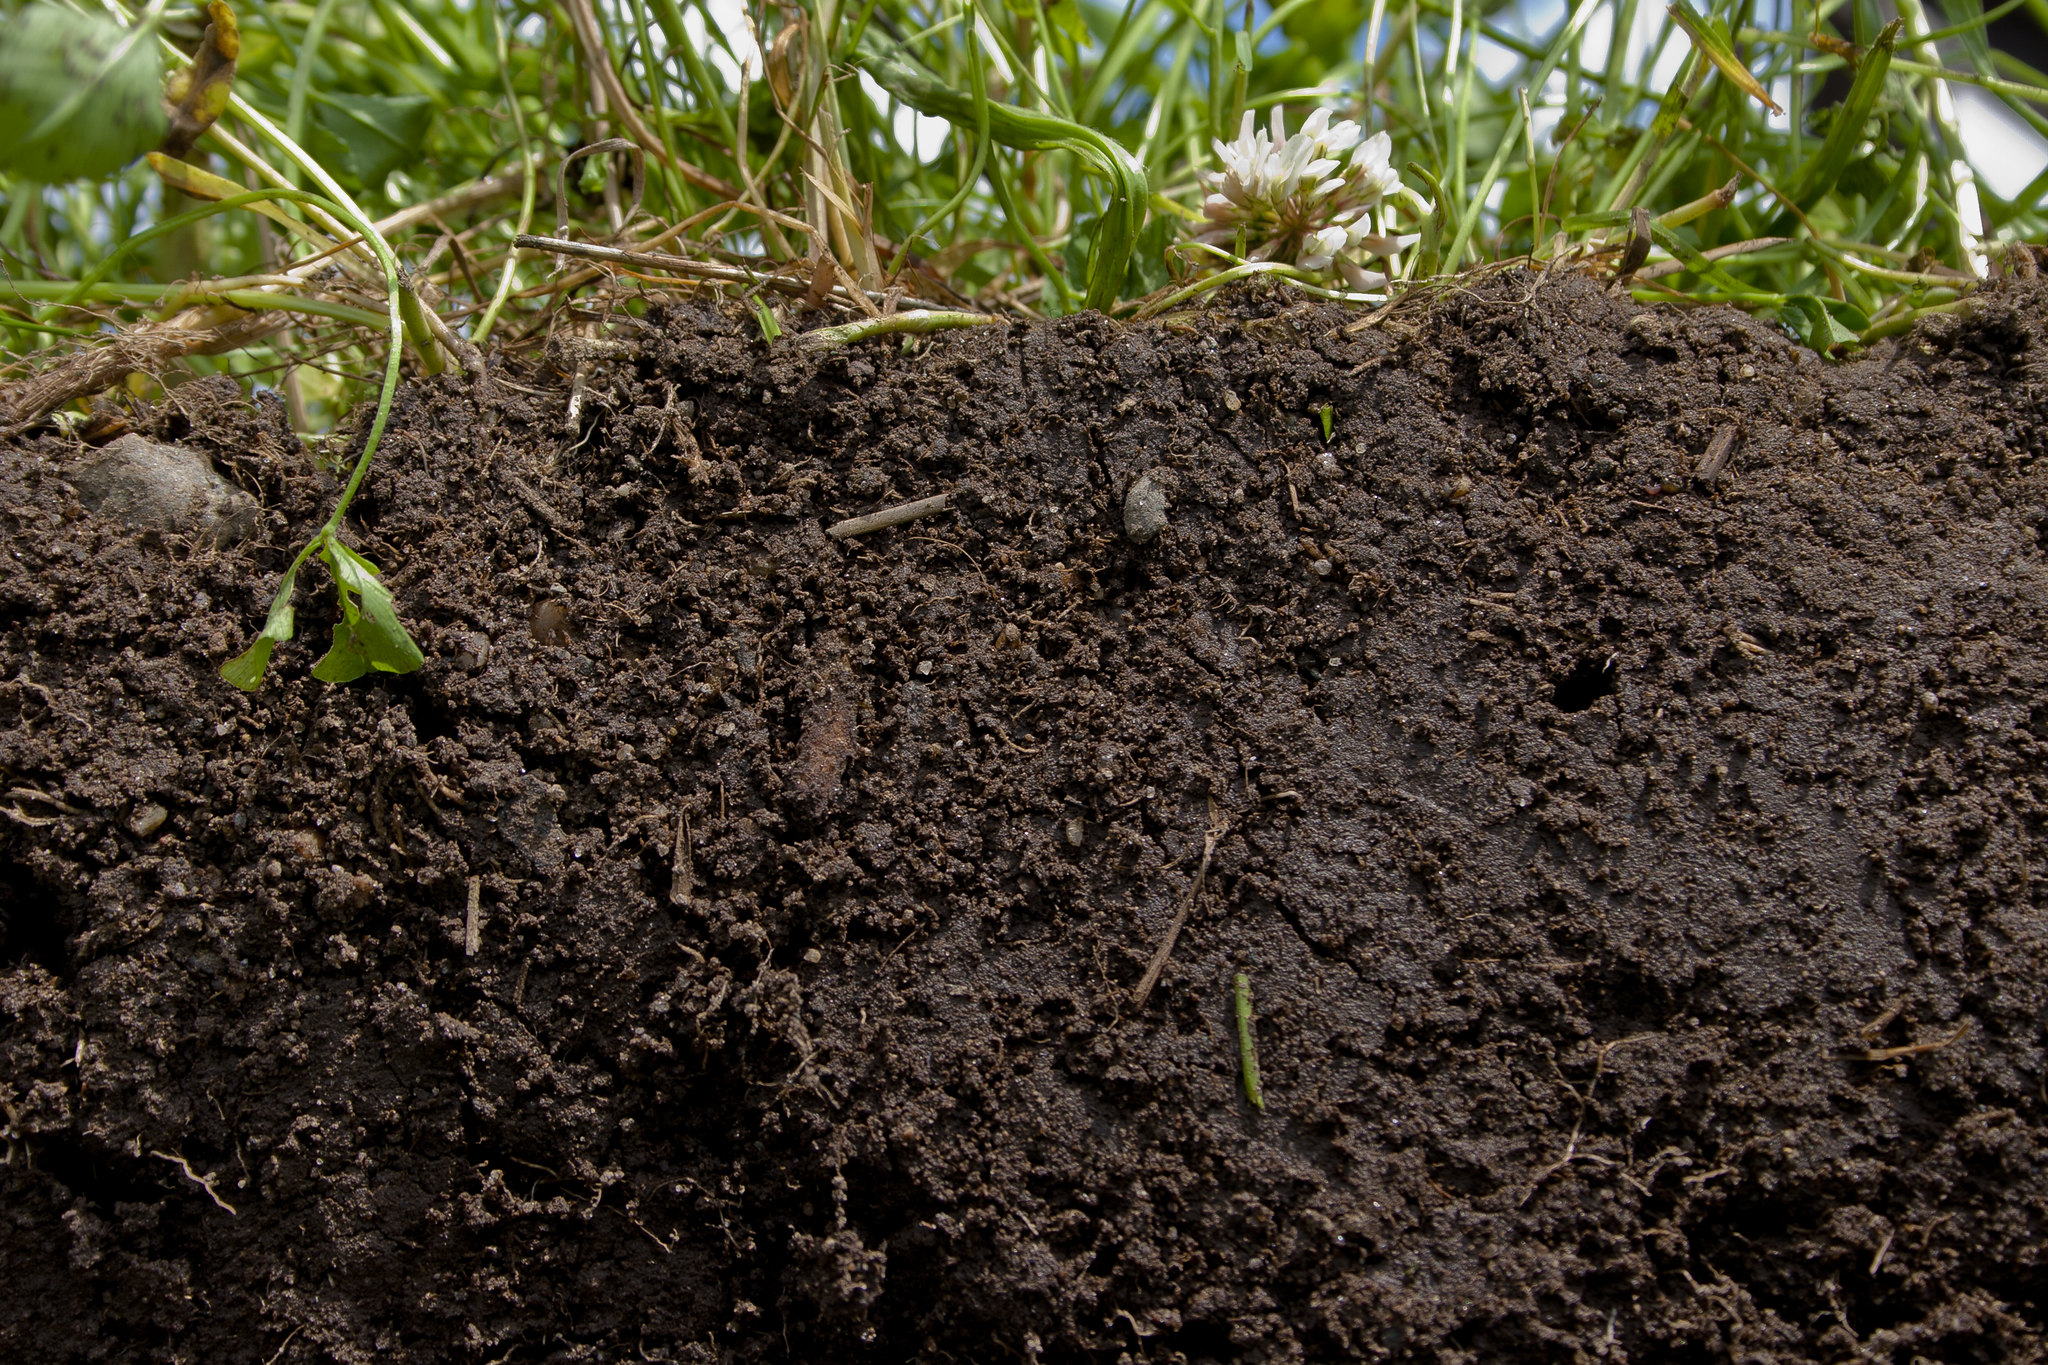 Closeup photo of a section of earth with rich soil on the bottom and grass growing on the top